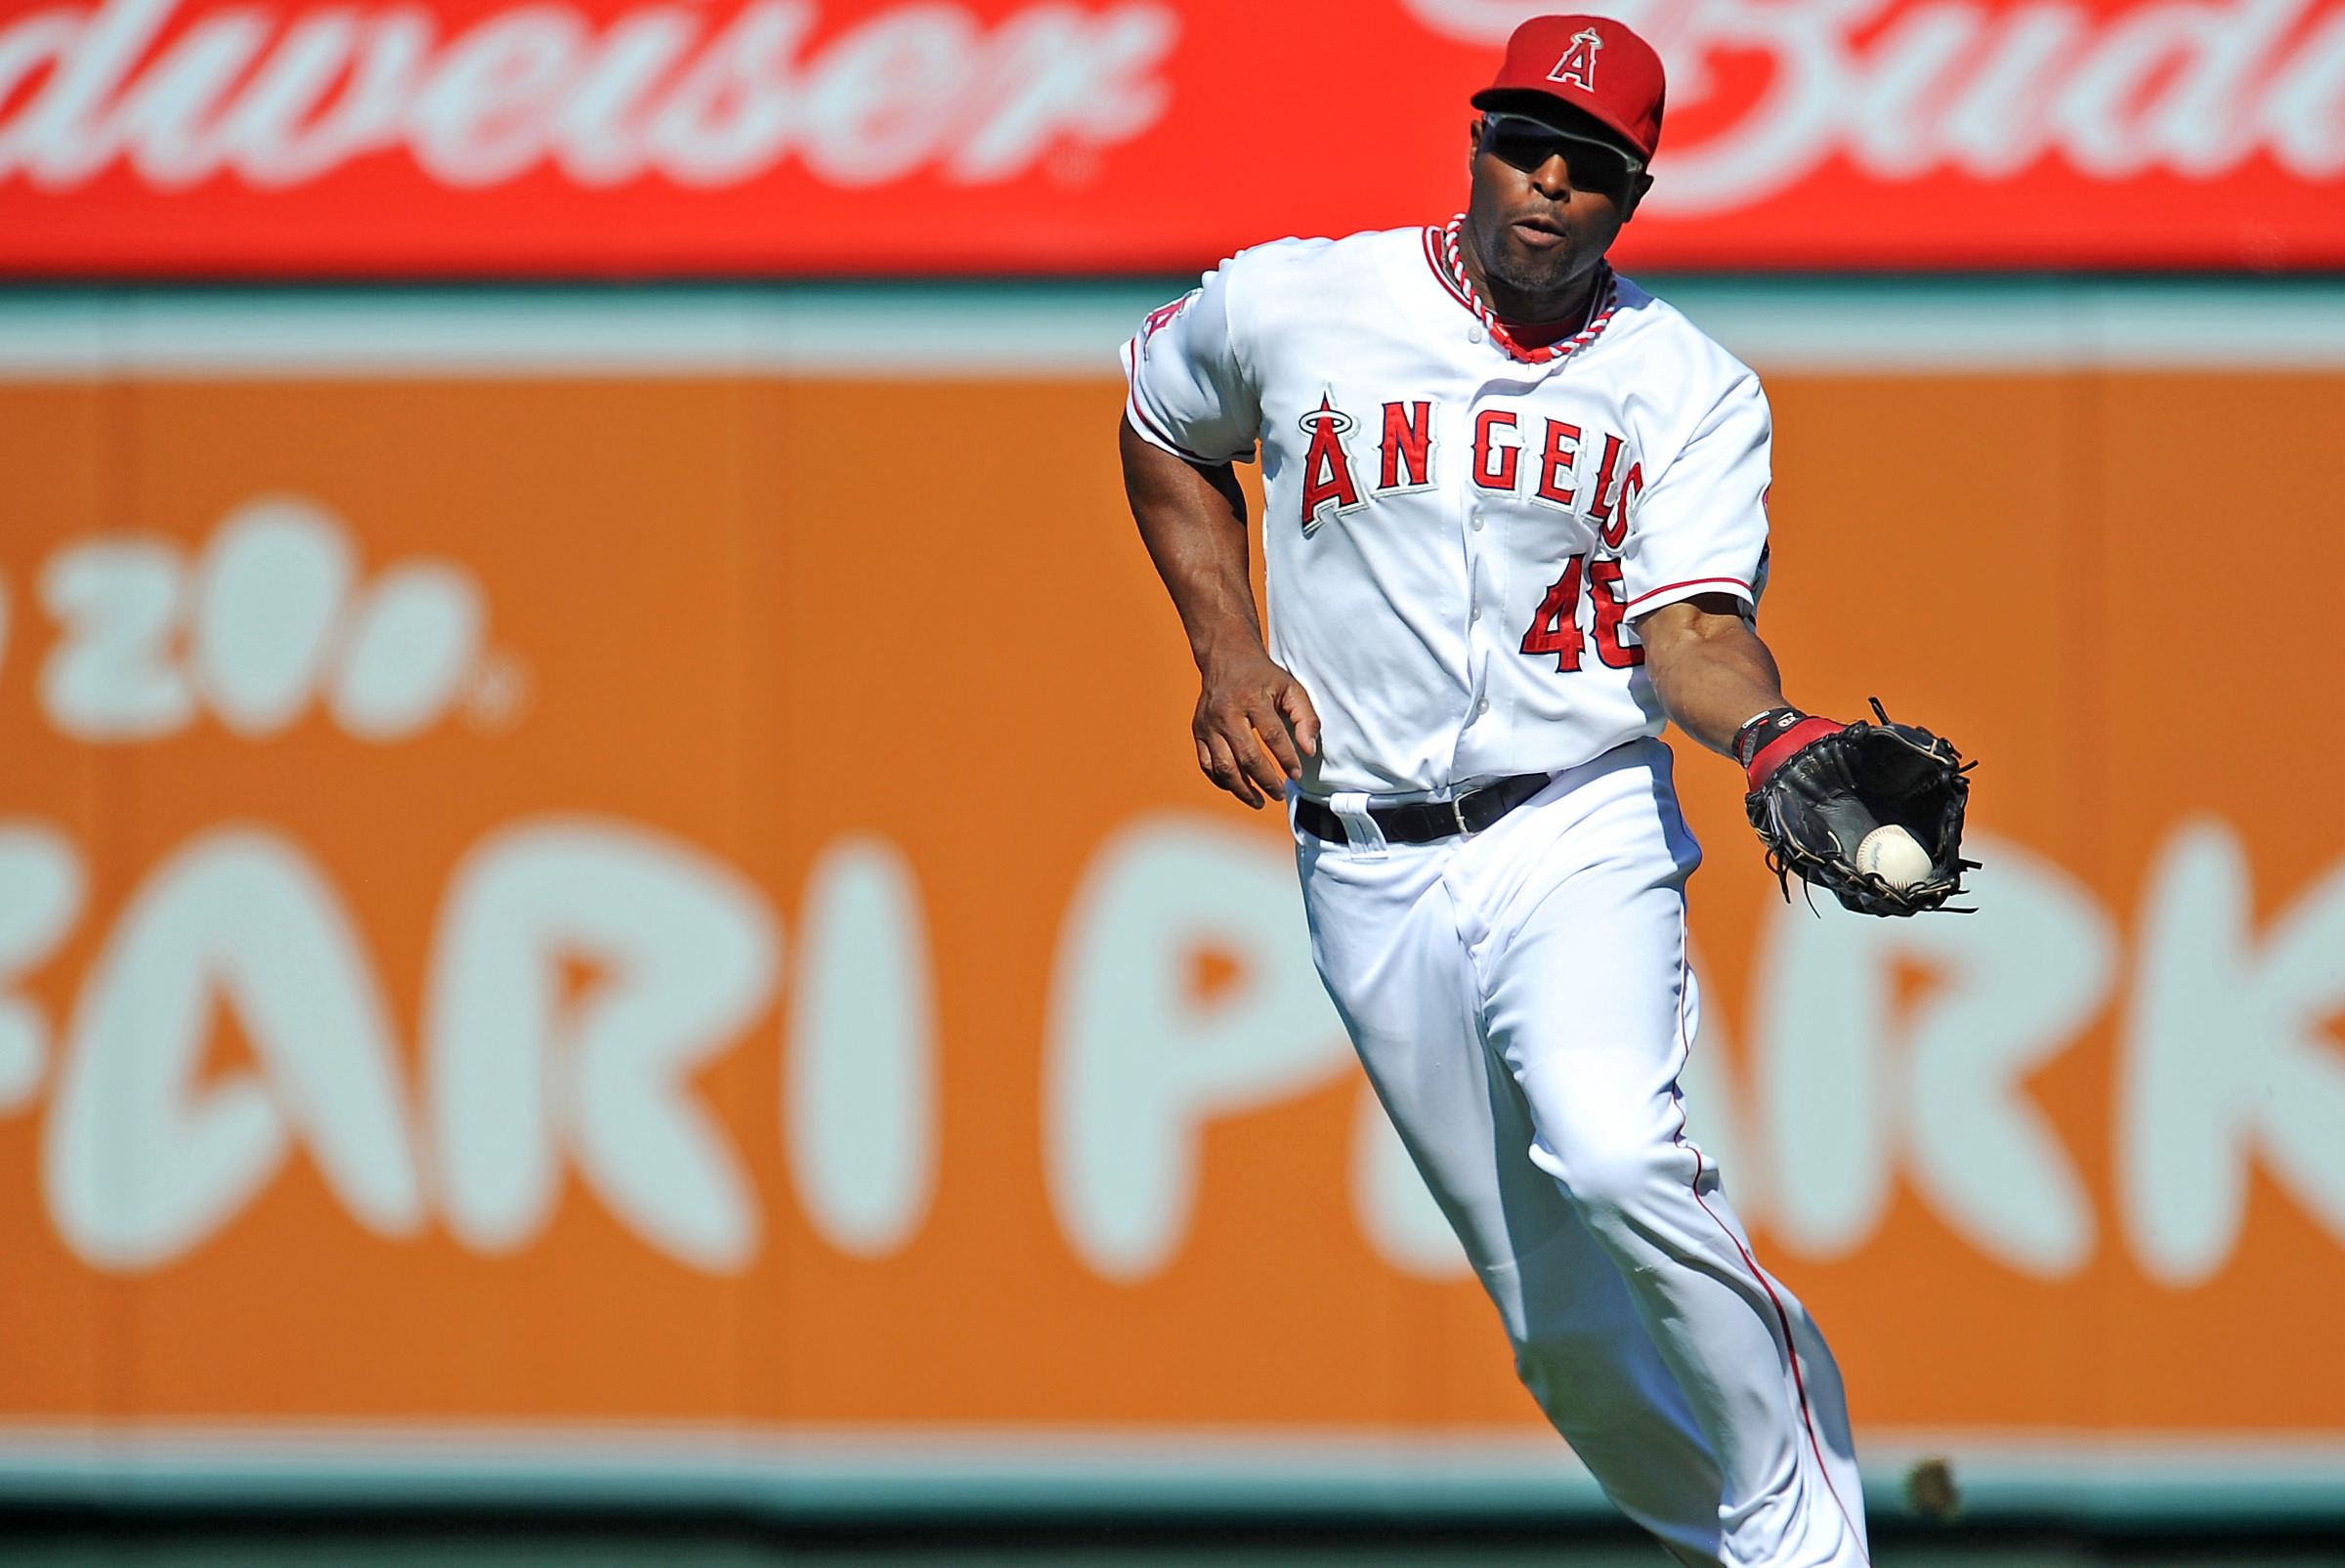 Potential Rangers OF, D-FW resident Torii Hunter signs with Tigers